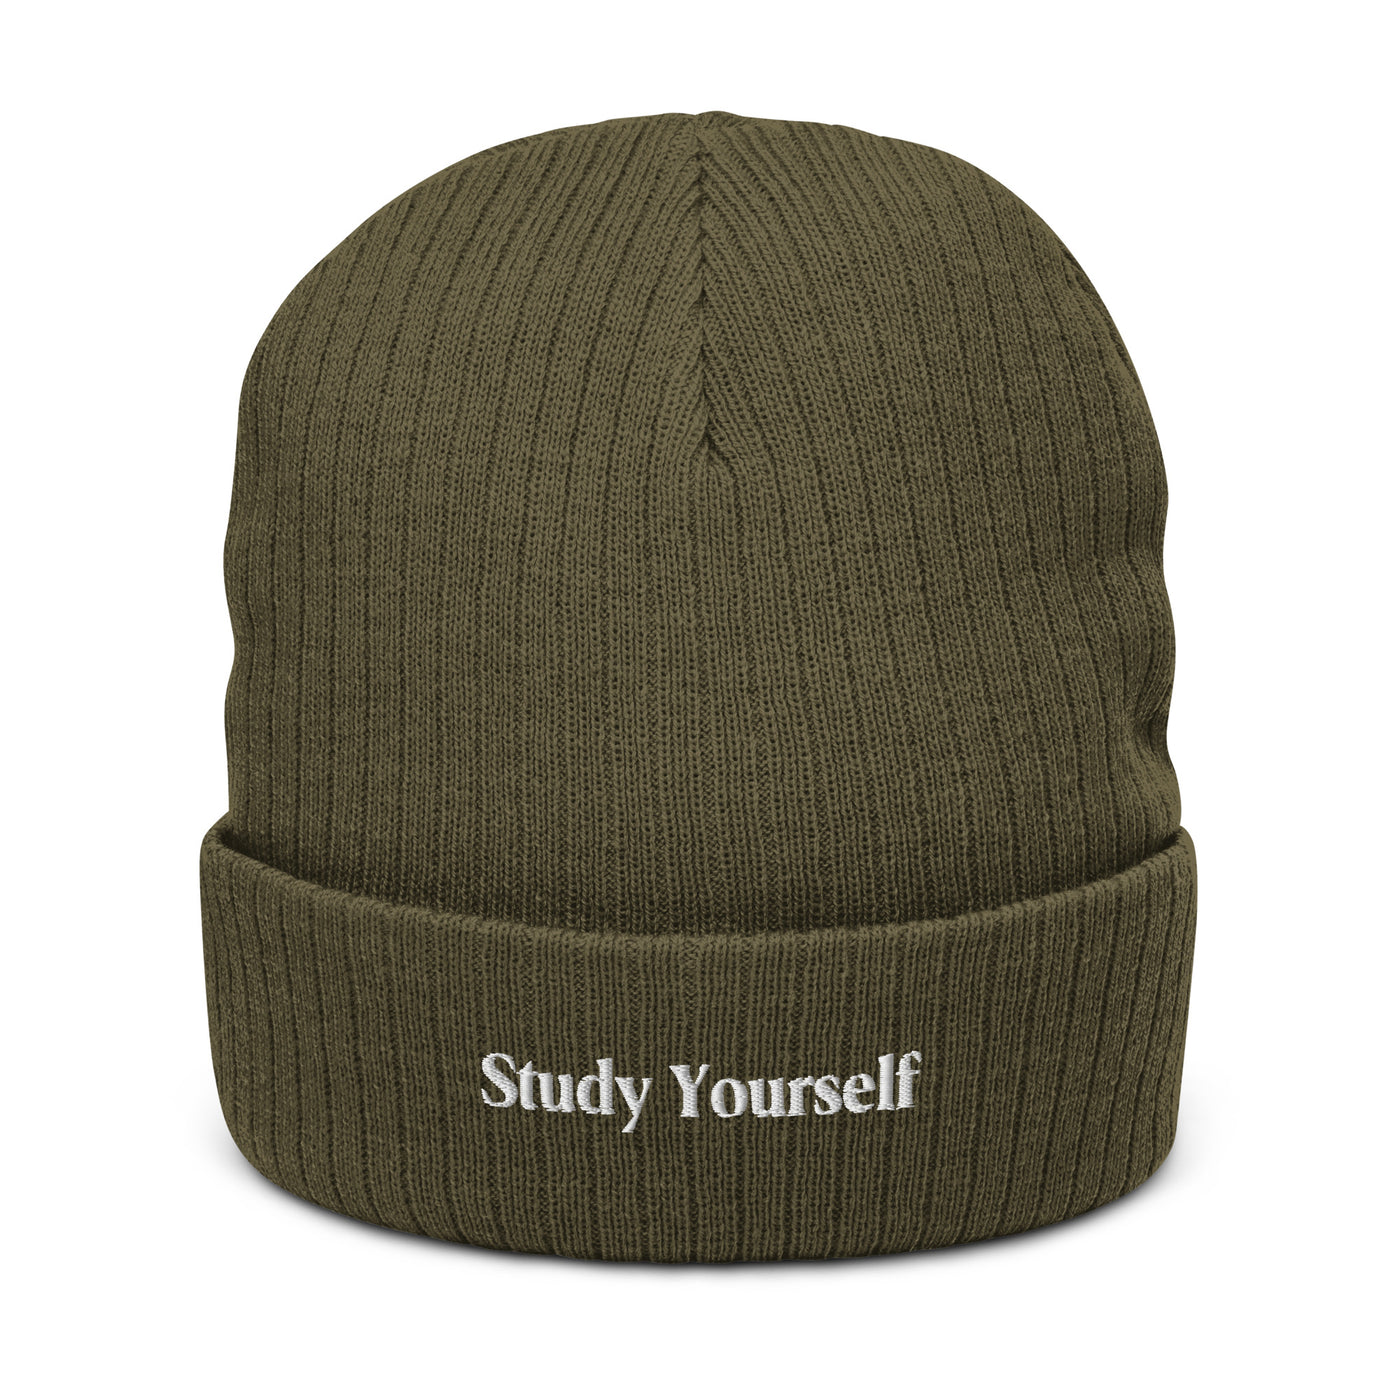 Study Yourself Recycled Cuffed Beanie